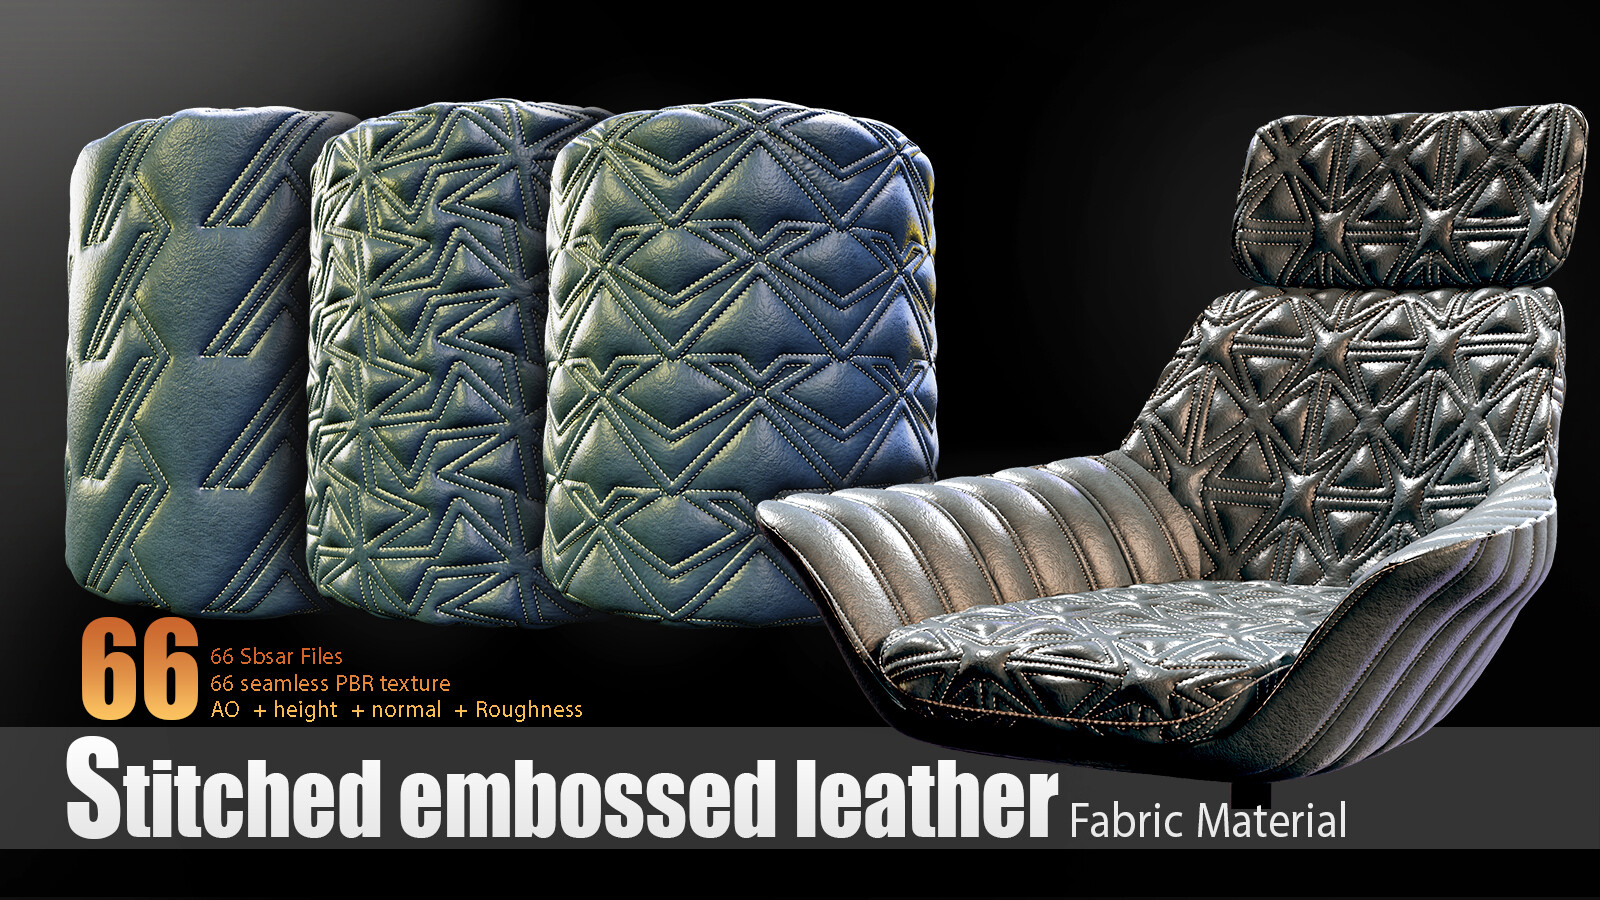 ArtStation - Leather Materials 17- Stitched leather, Pbr 4k Seamless